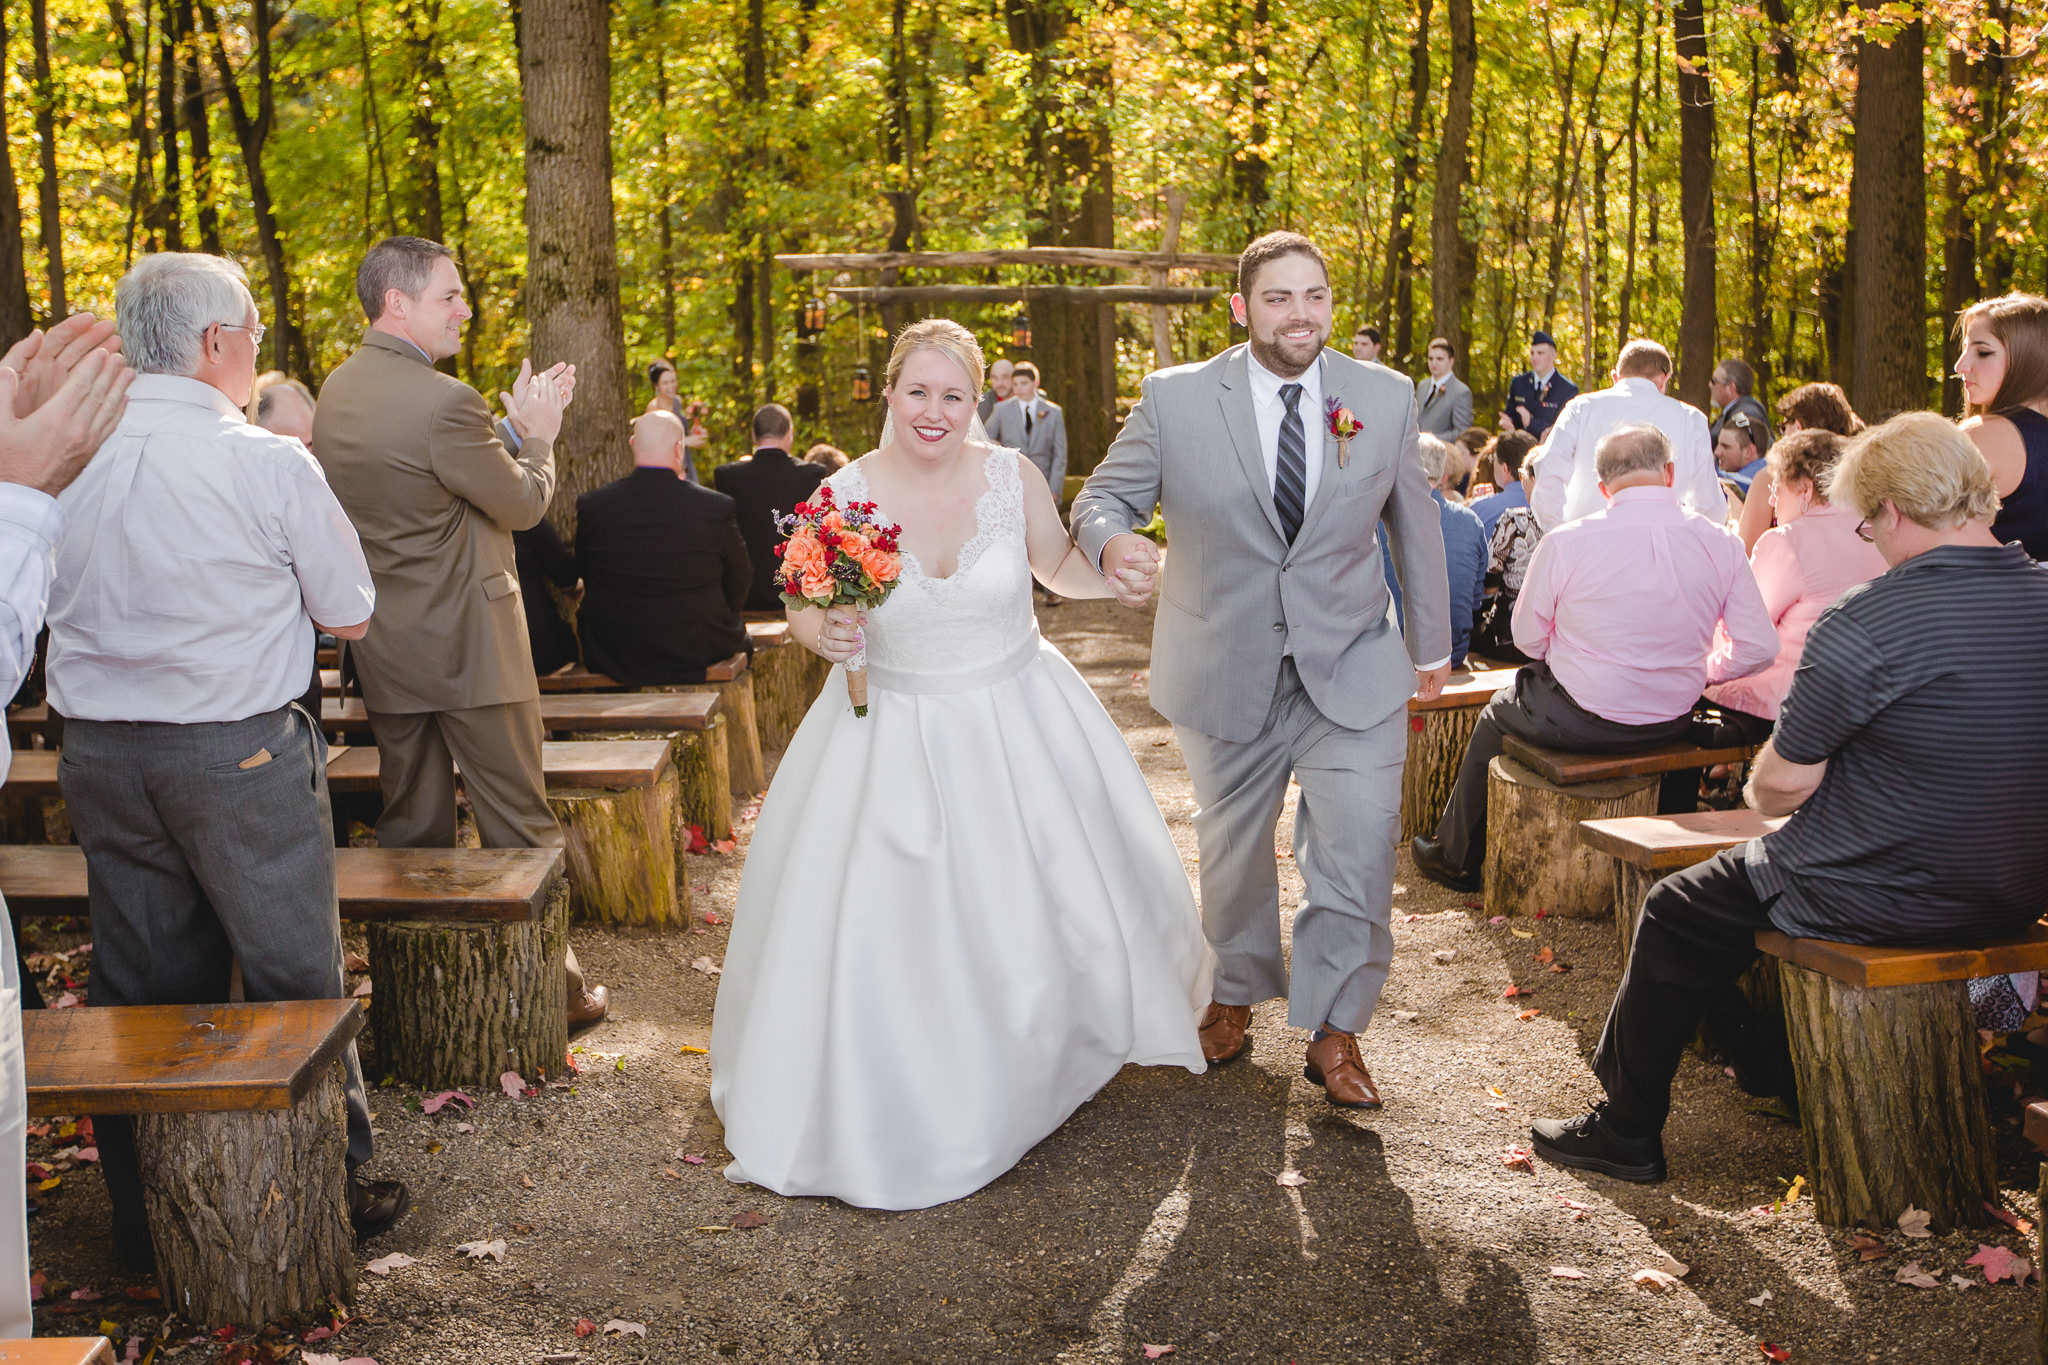 Newlyweds exit their rustic outdoor ceremony at the Barn at Soergel Hollow